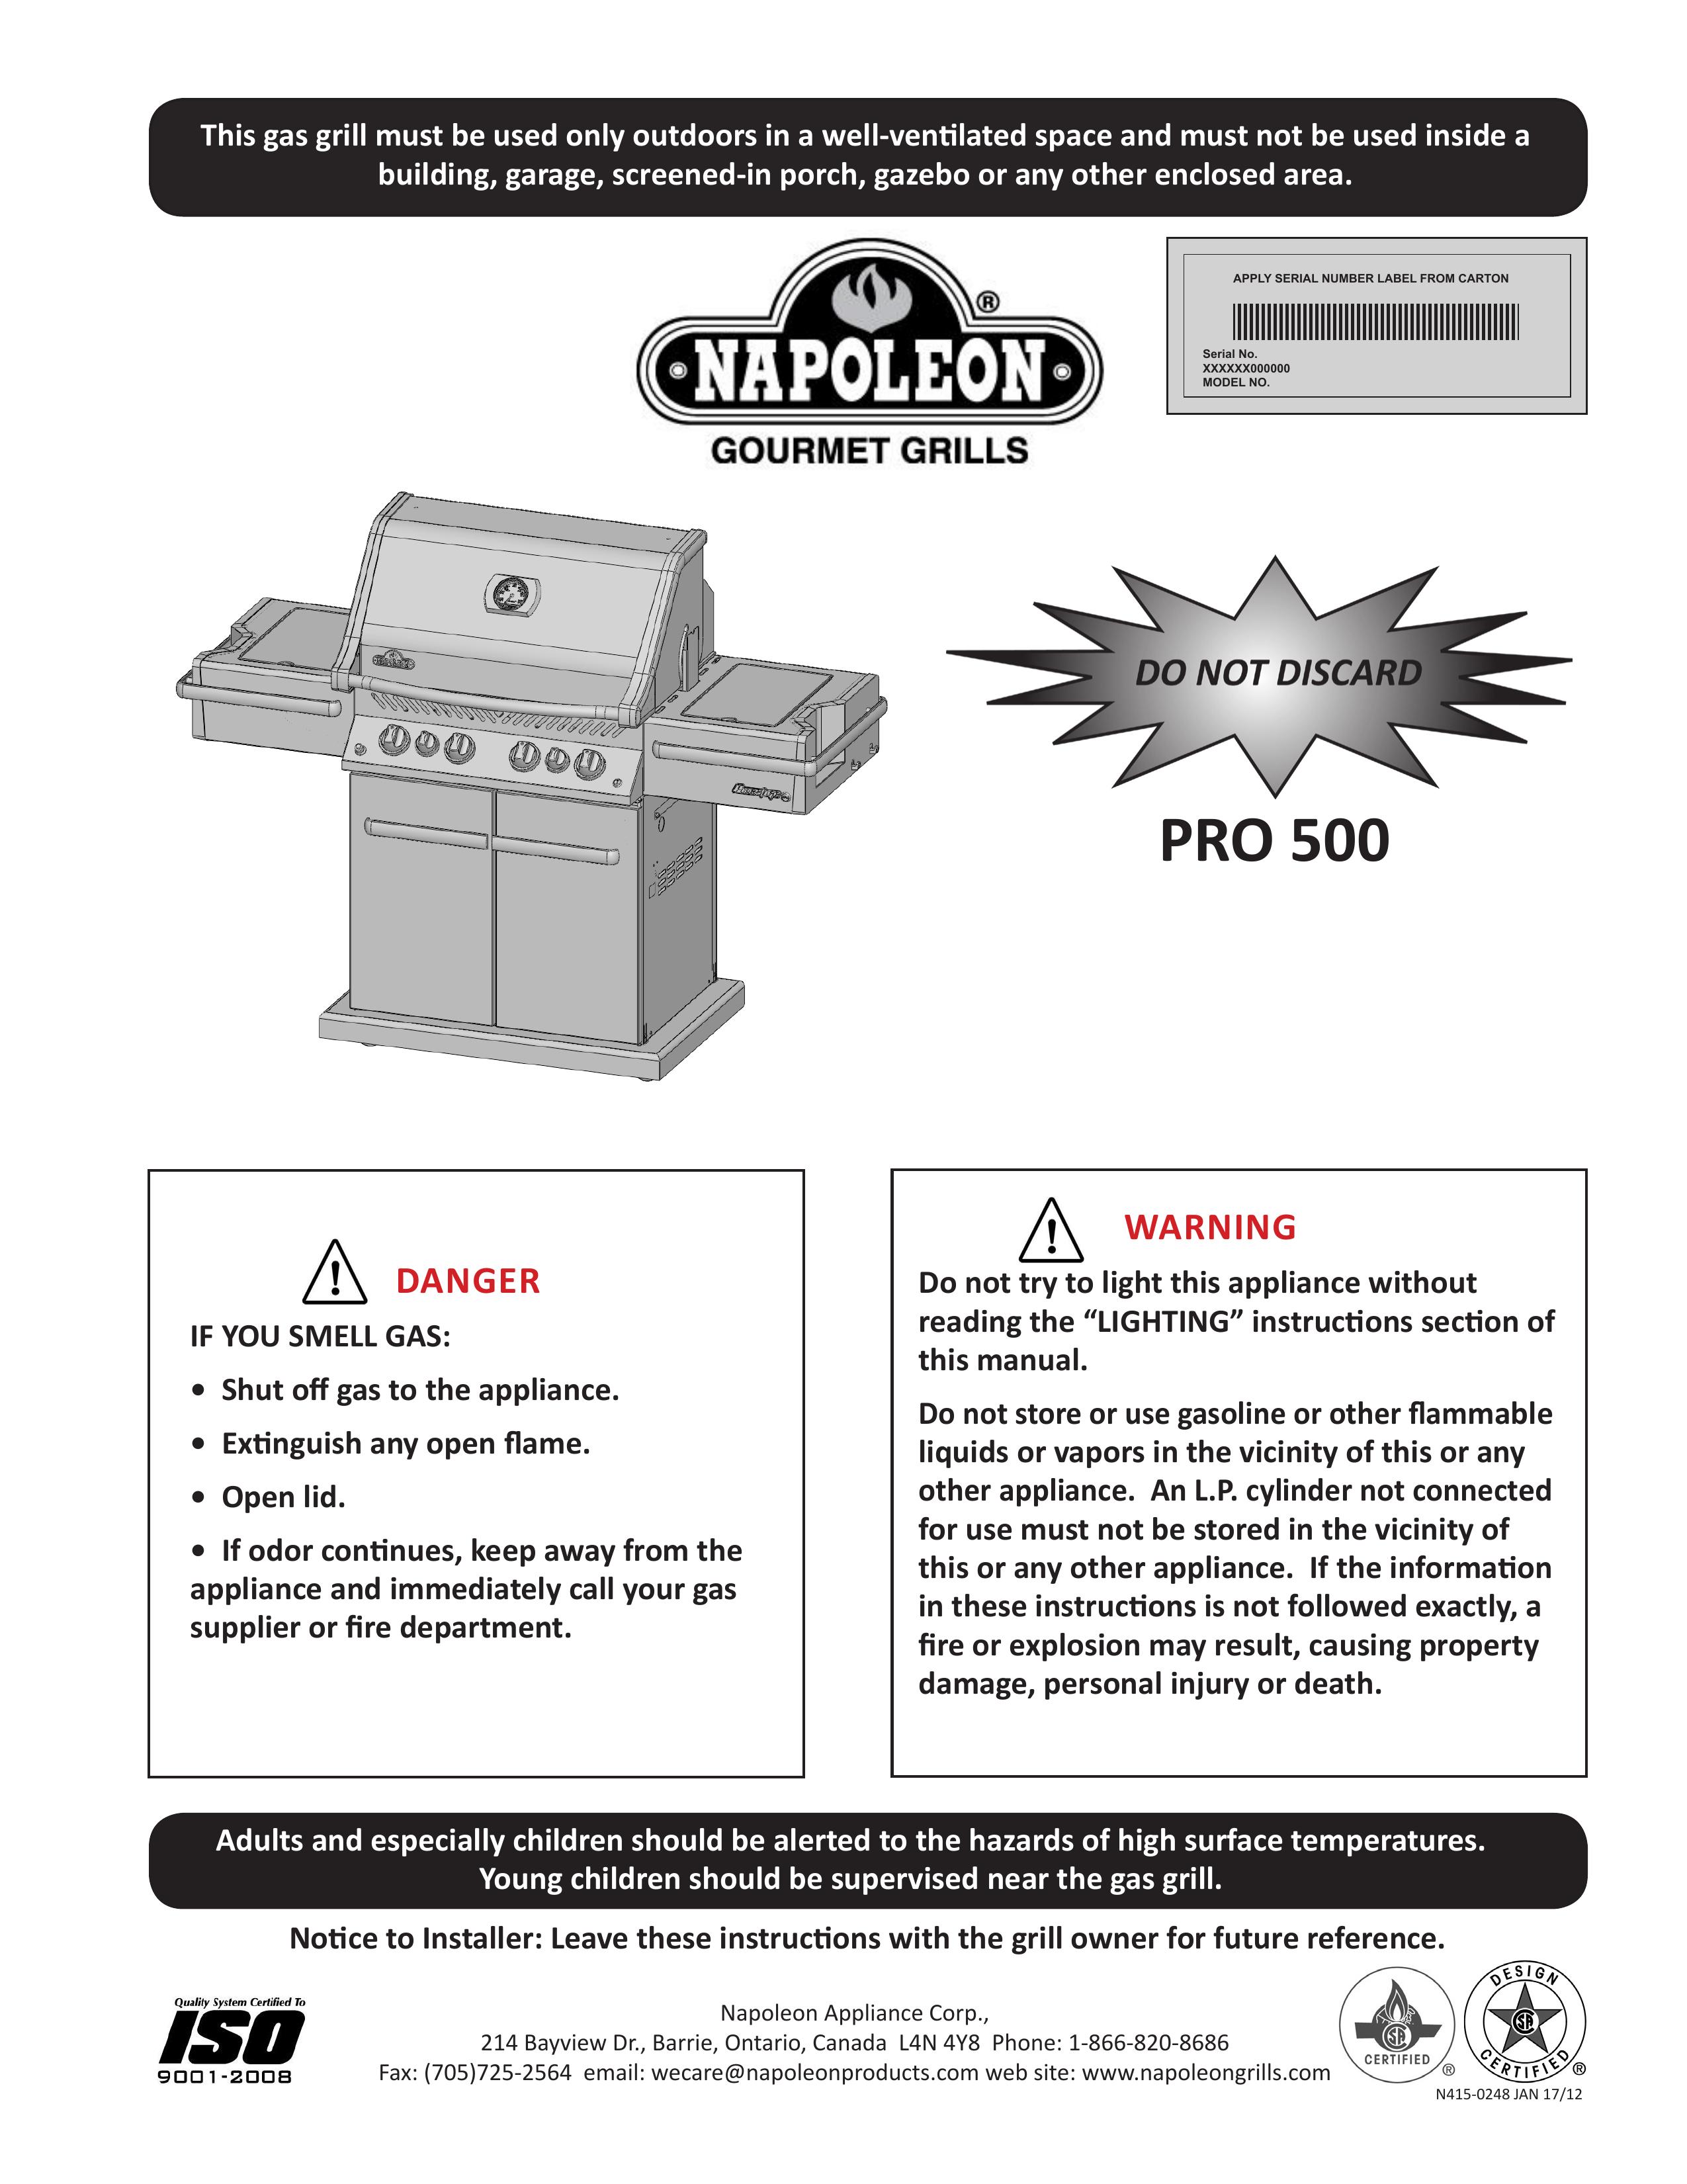 Napoleon Grills PRO 500 Gas Grill User Manual